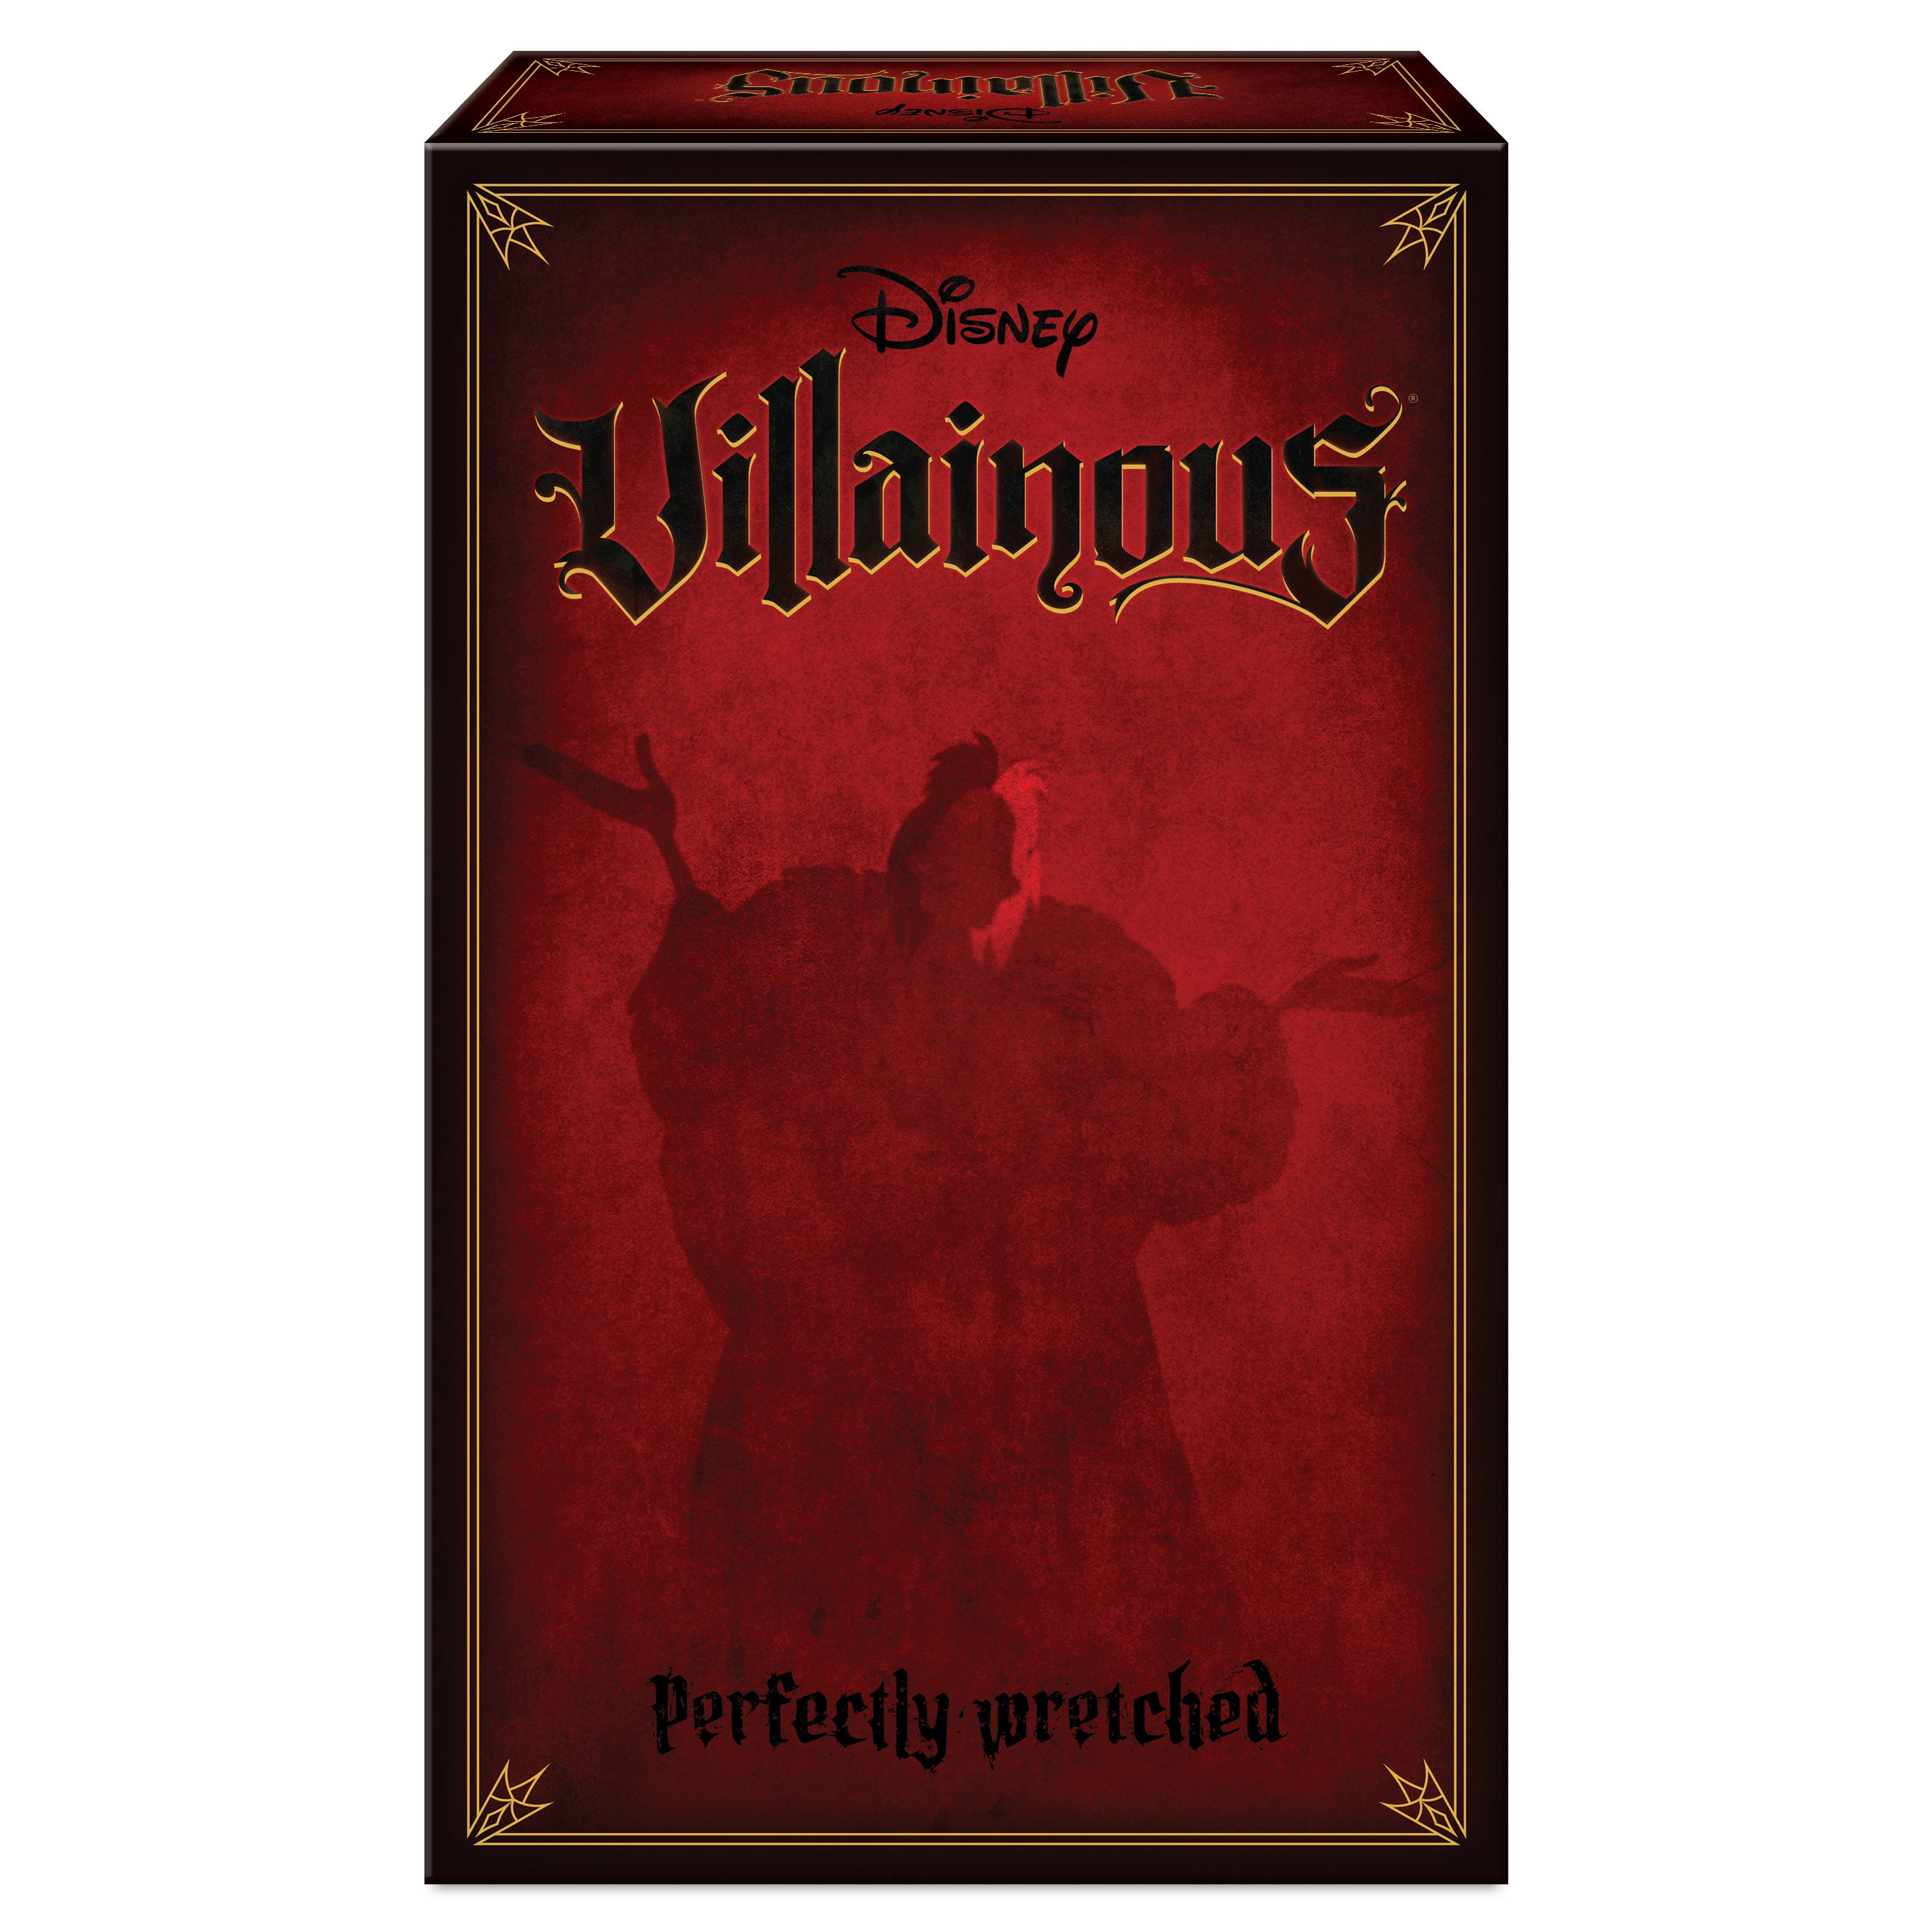 Ravensburger Disney Villainous Perfectly Wretched Strategy Board Game for Age...